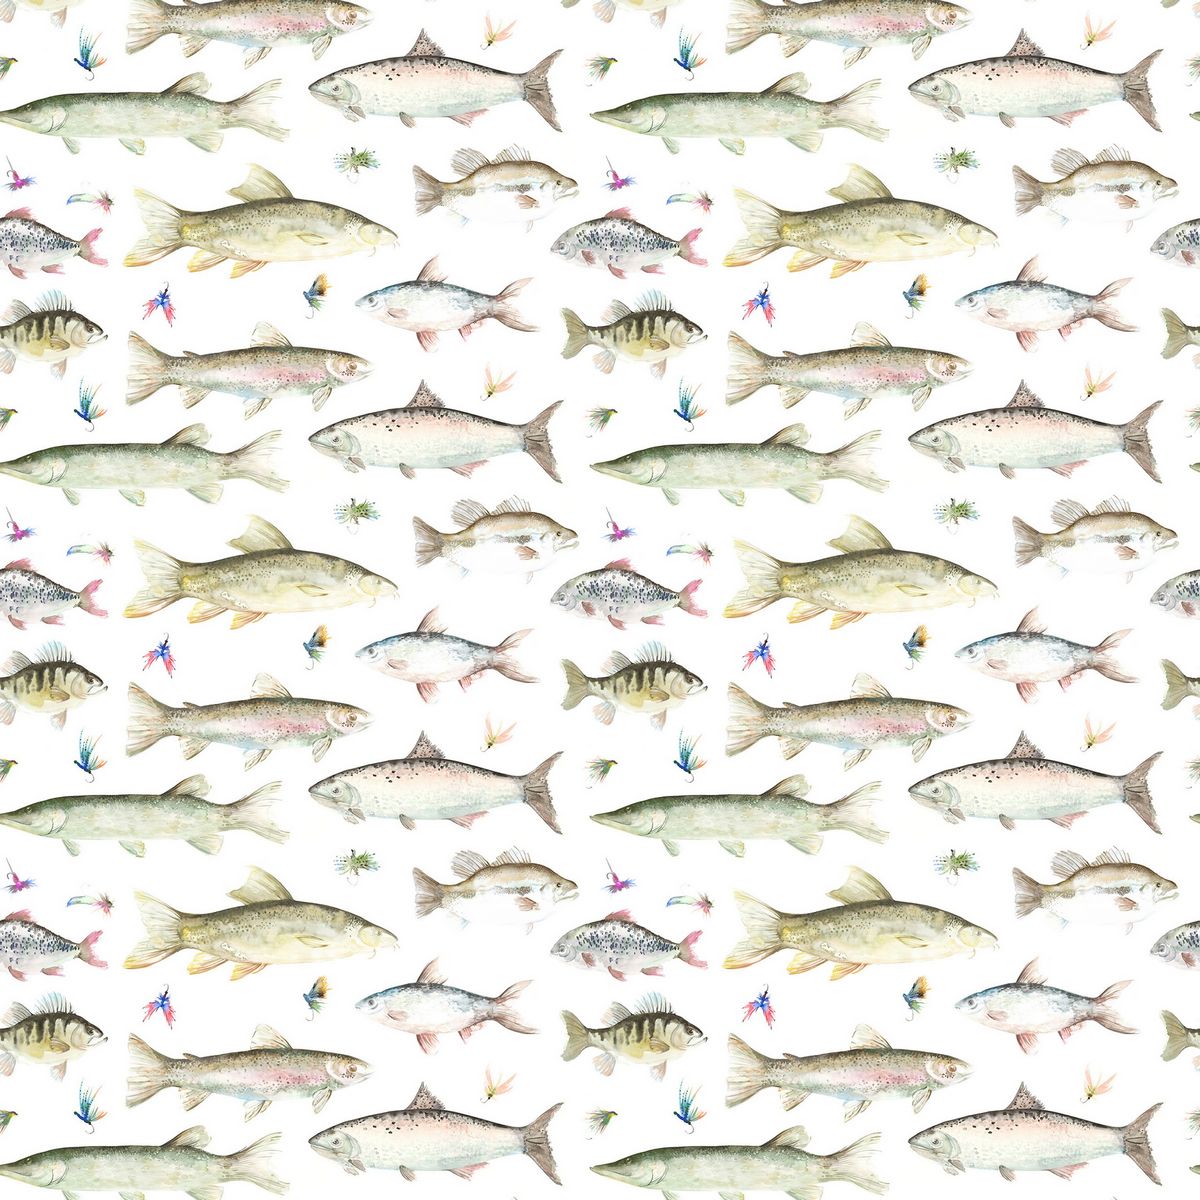 River Fish Large Cream Fabric by Voyage Maison